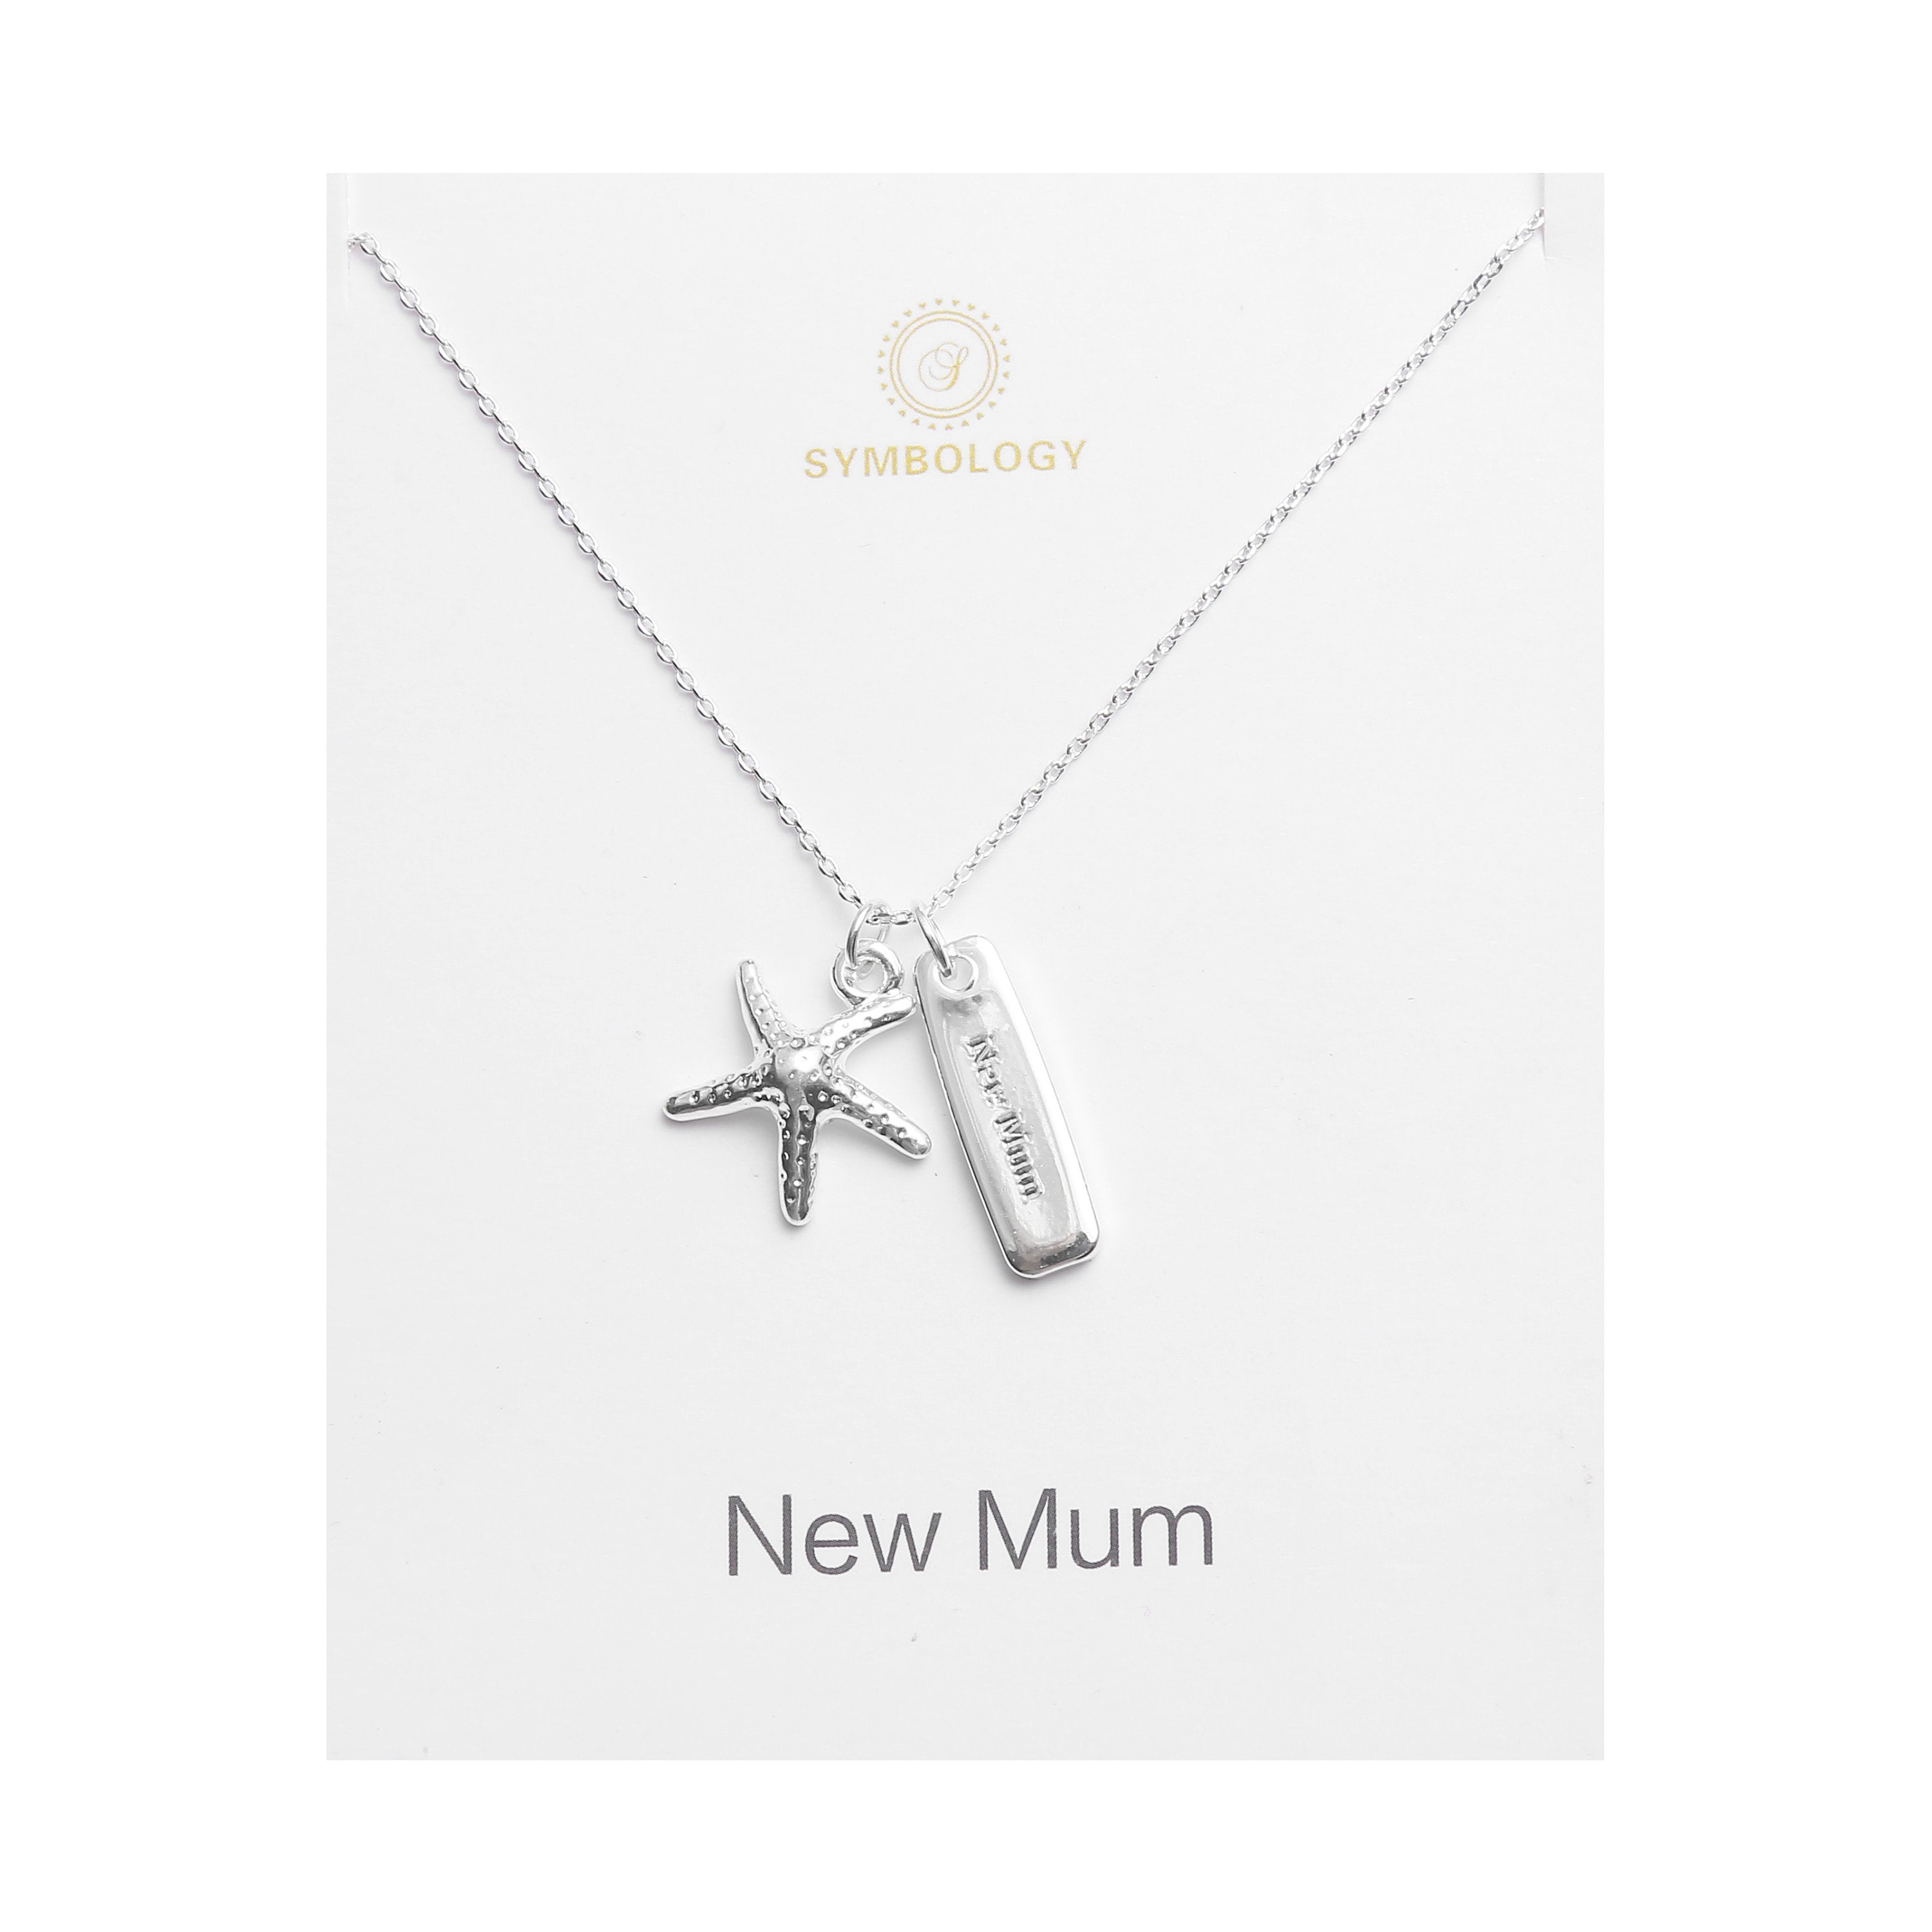 New mum gift sterling silver necklace | mother baby pendant | Ireland